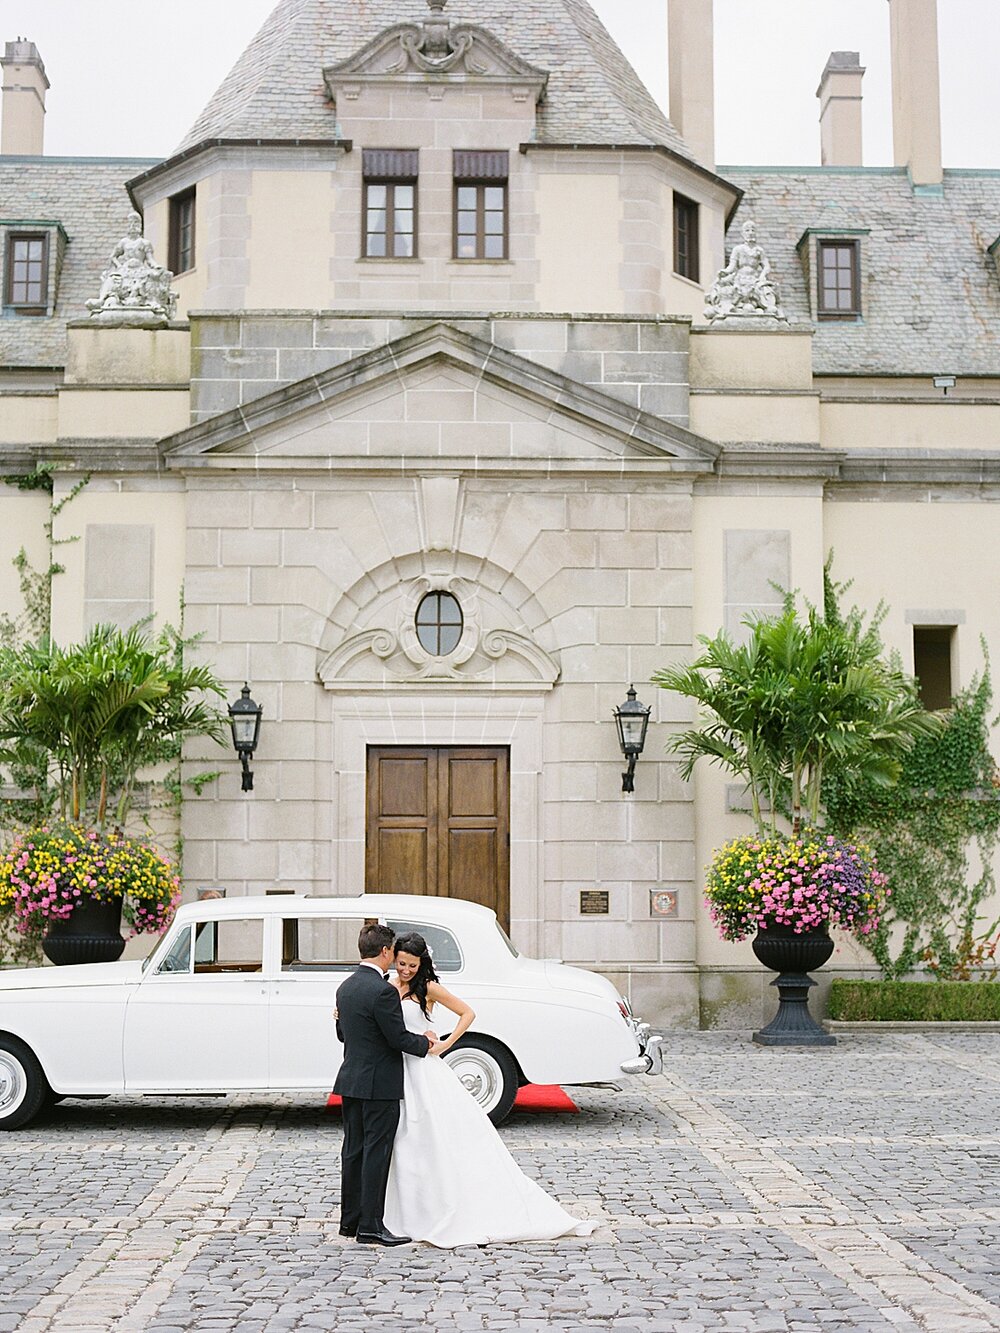 Oheka Castle wedding portraits in New York | Tri-State Area Wedding Venues photographed by NY wedding photographer Asher Gardner Photography